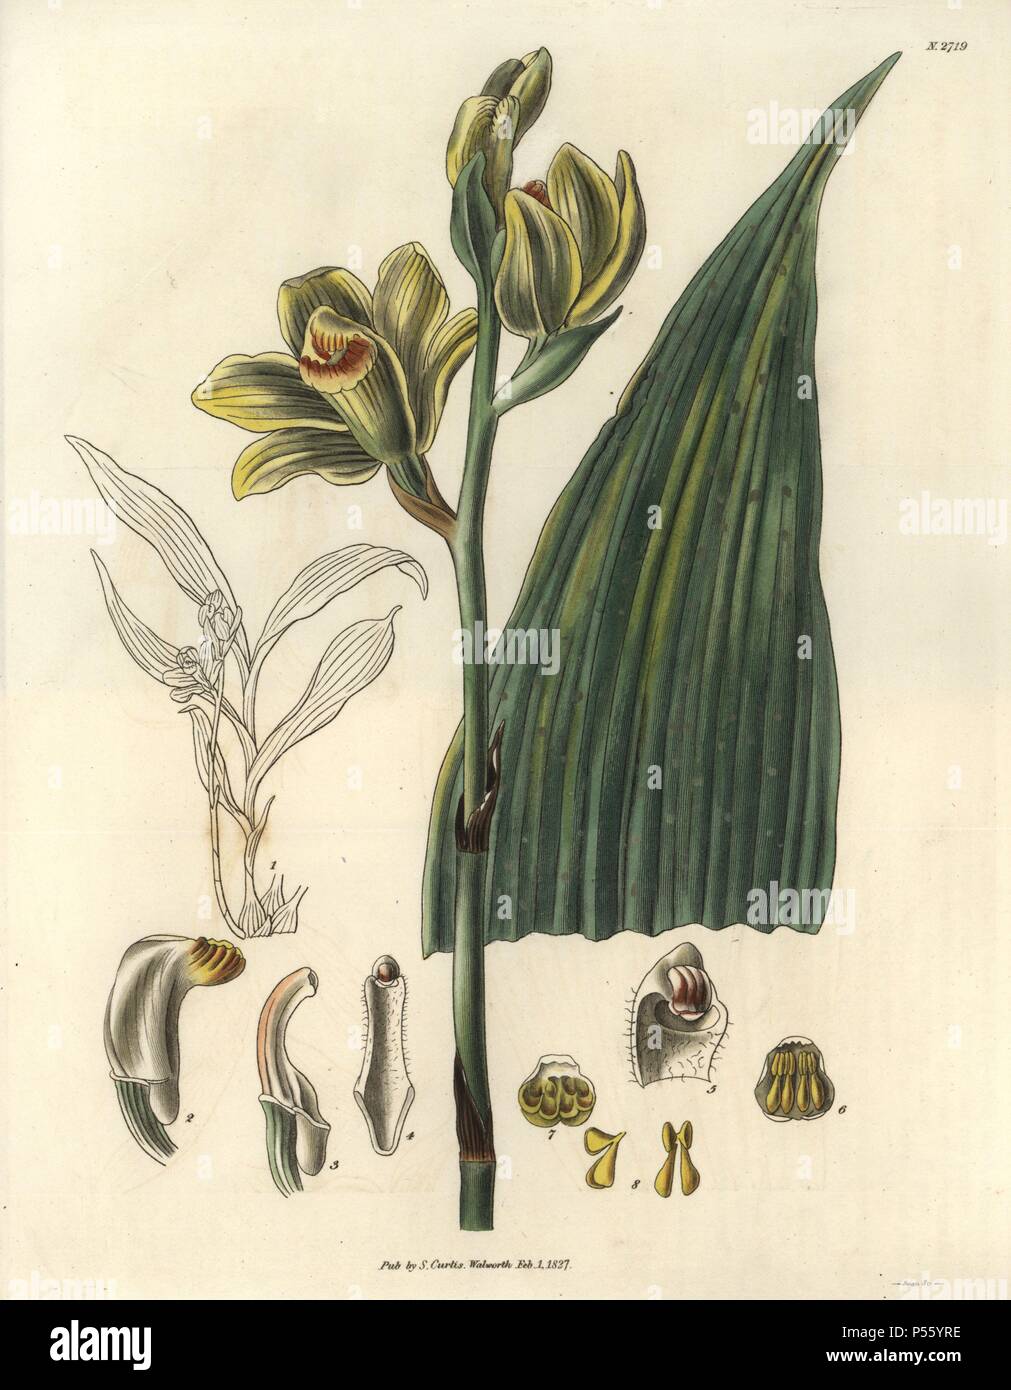 Woodfordian bletia orchid with yellow-green flowers. . Phaius flavus (Blume) Lindley (Bletia woodfordii). . Illustration by WJ Hooker, engraved by Swan. Handcolored copperplate engraving from William Curtis's 'The Botanical Magazine' 1827.. . . William Jackson Hooker (1785-1865) was an English botanist, writer and artist. He was Regius Professor of Botany at Glasgow University, and editor of Curtis' 'Botanical Magazine' from 1827 to 1865. In 1841, he was appointed director of the Royal Botanic Gardens at Kew, and was succeeded by his son Joseph Dalton. Hooker documented the fern and orchid cra Stock Photo